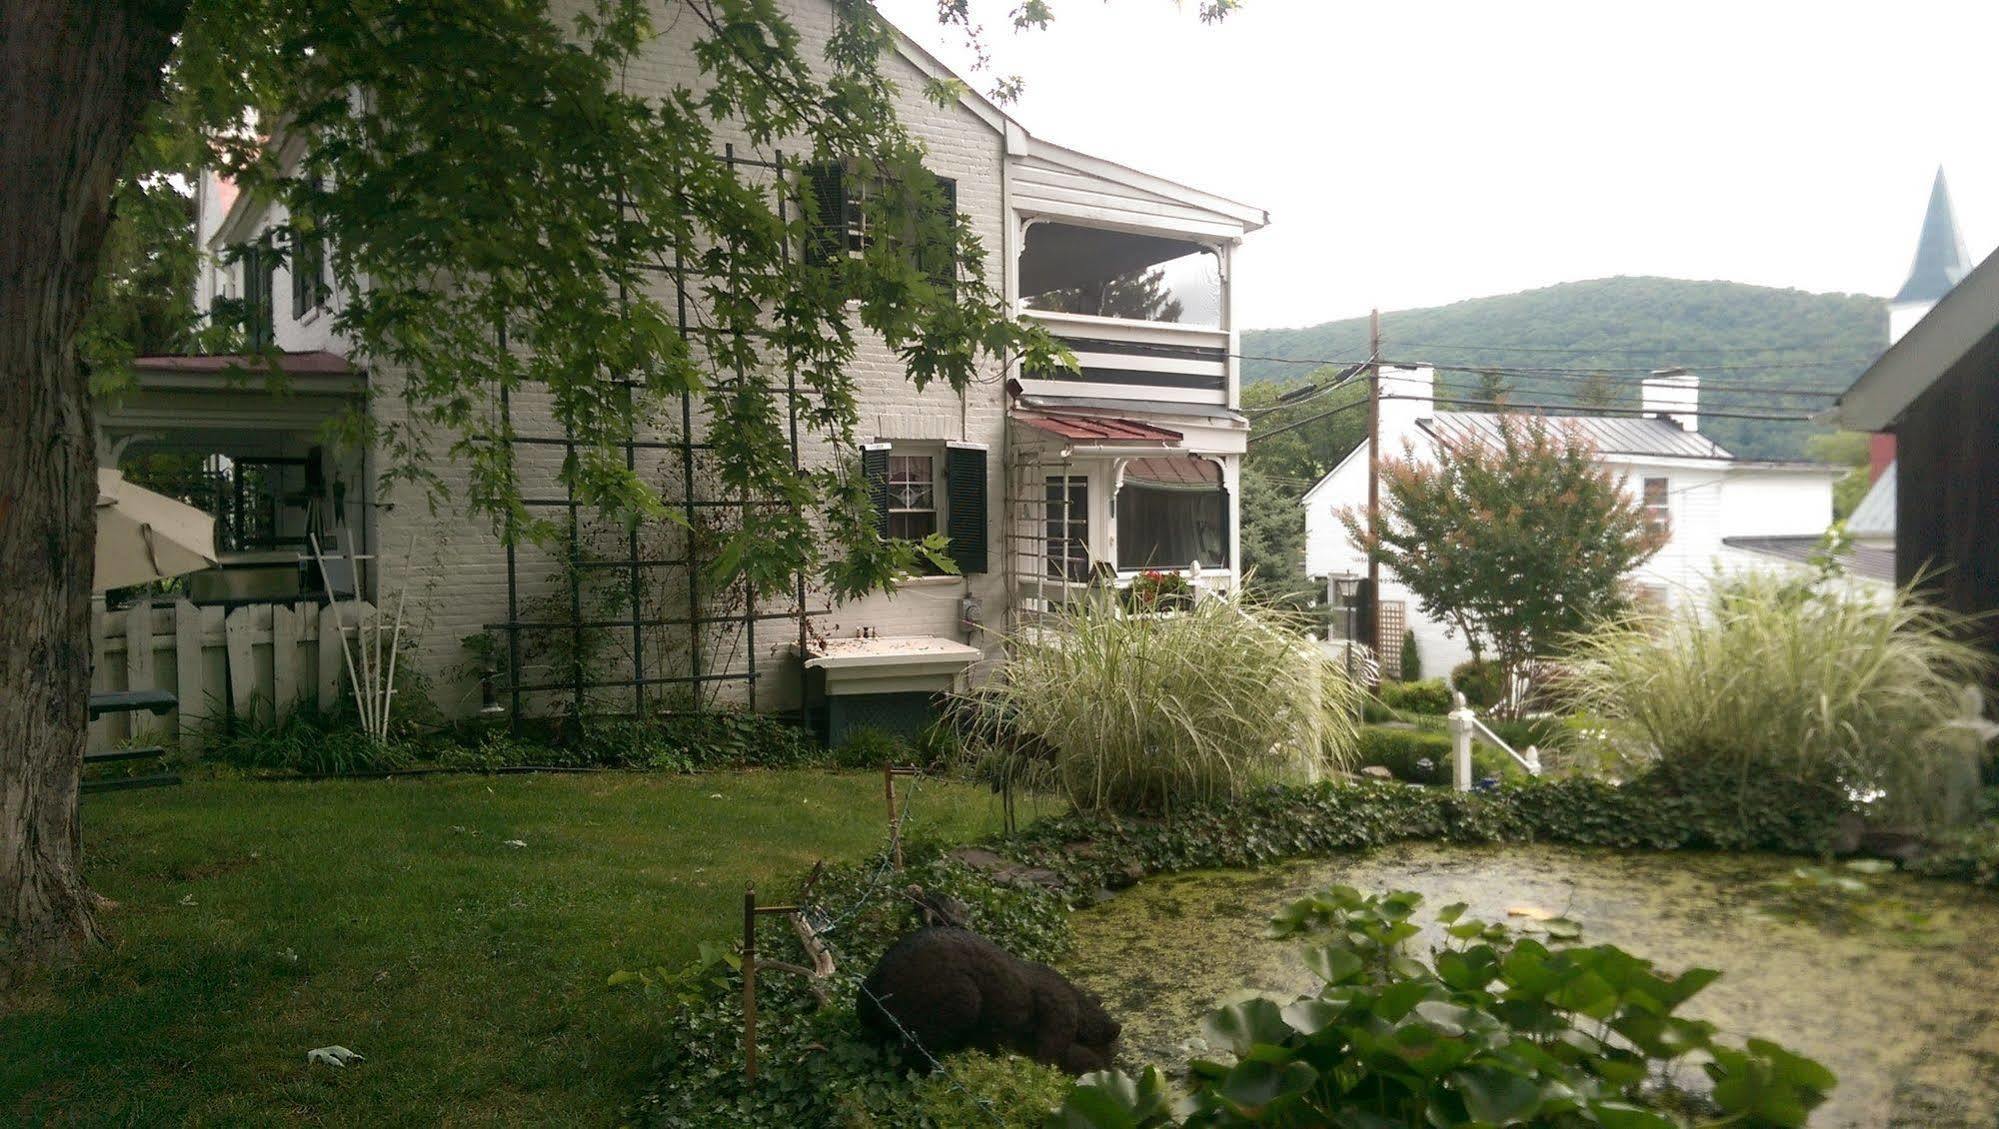 Lily Garden Bed And Breakfast Harpers Ferry Luaran gambar